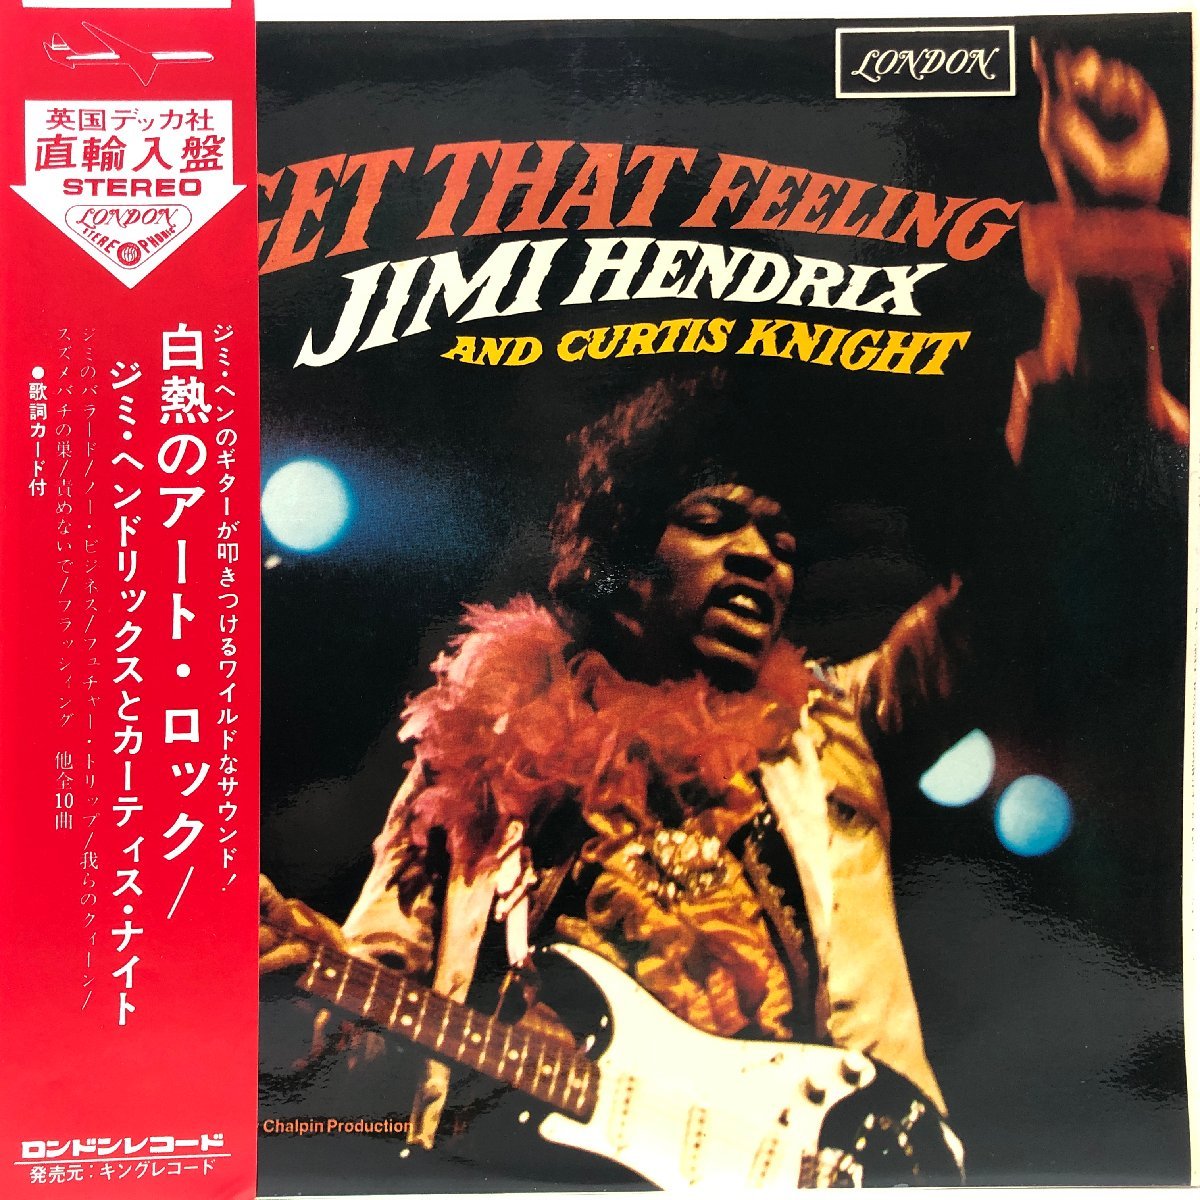 【UK盤 LP】JIMI HENDRIX AND CURTIS KNIGHT / GET THAT FEELING